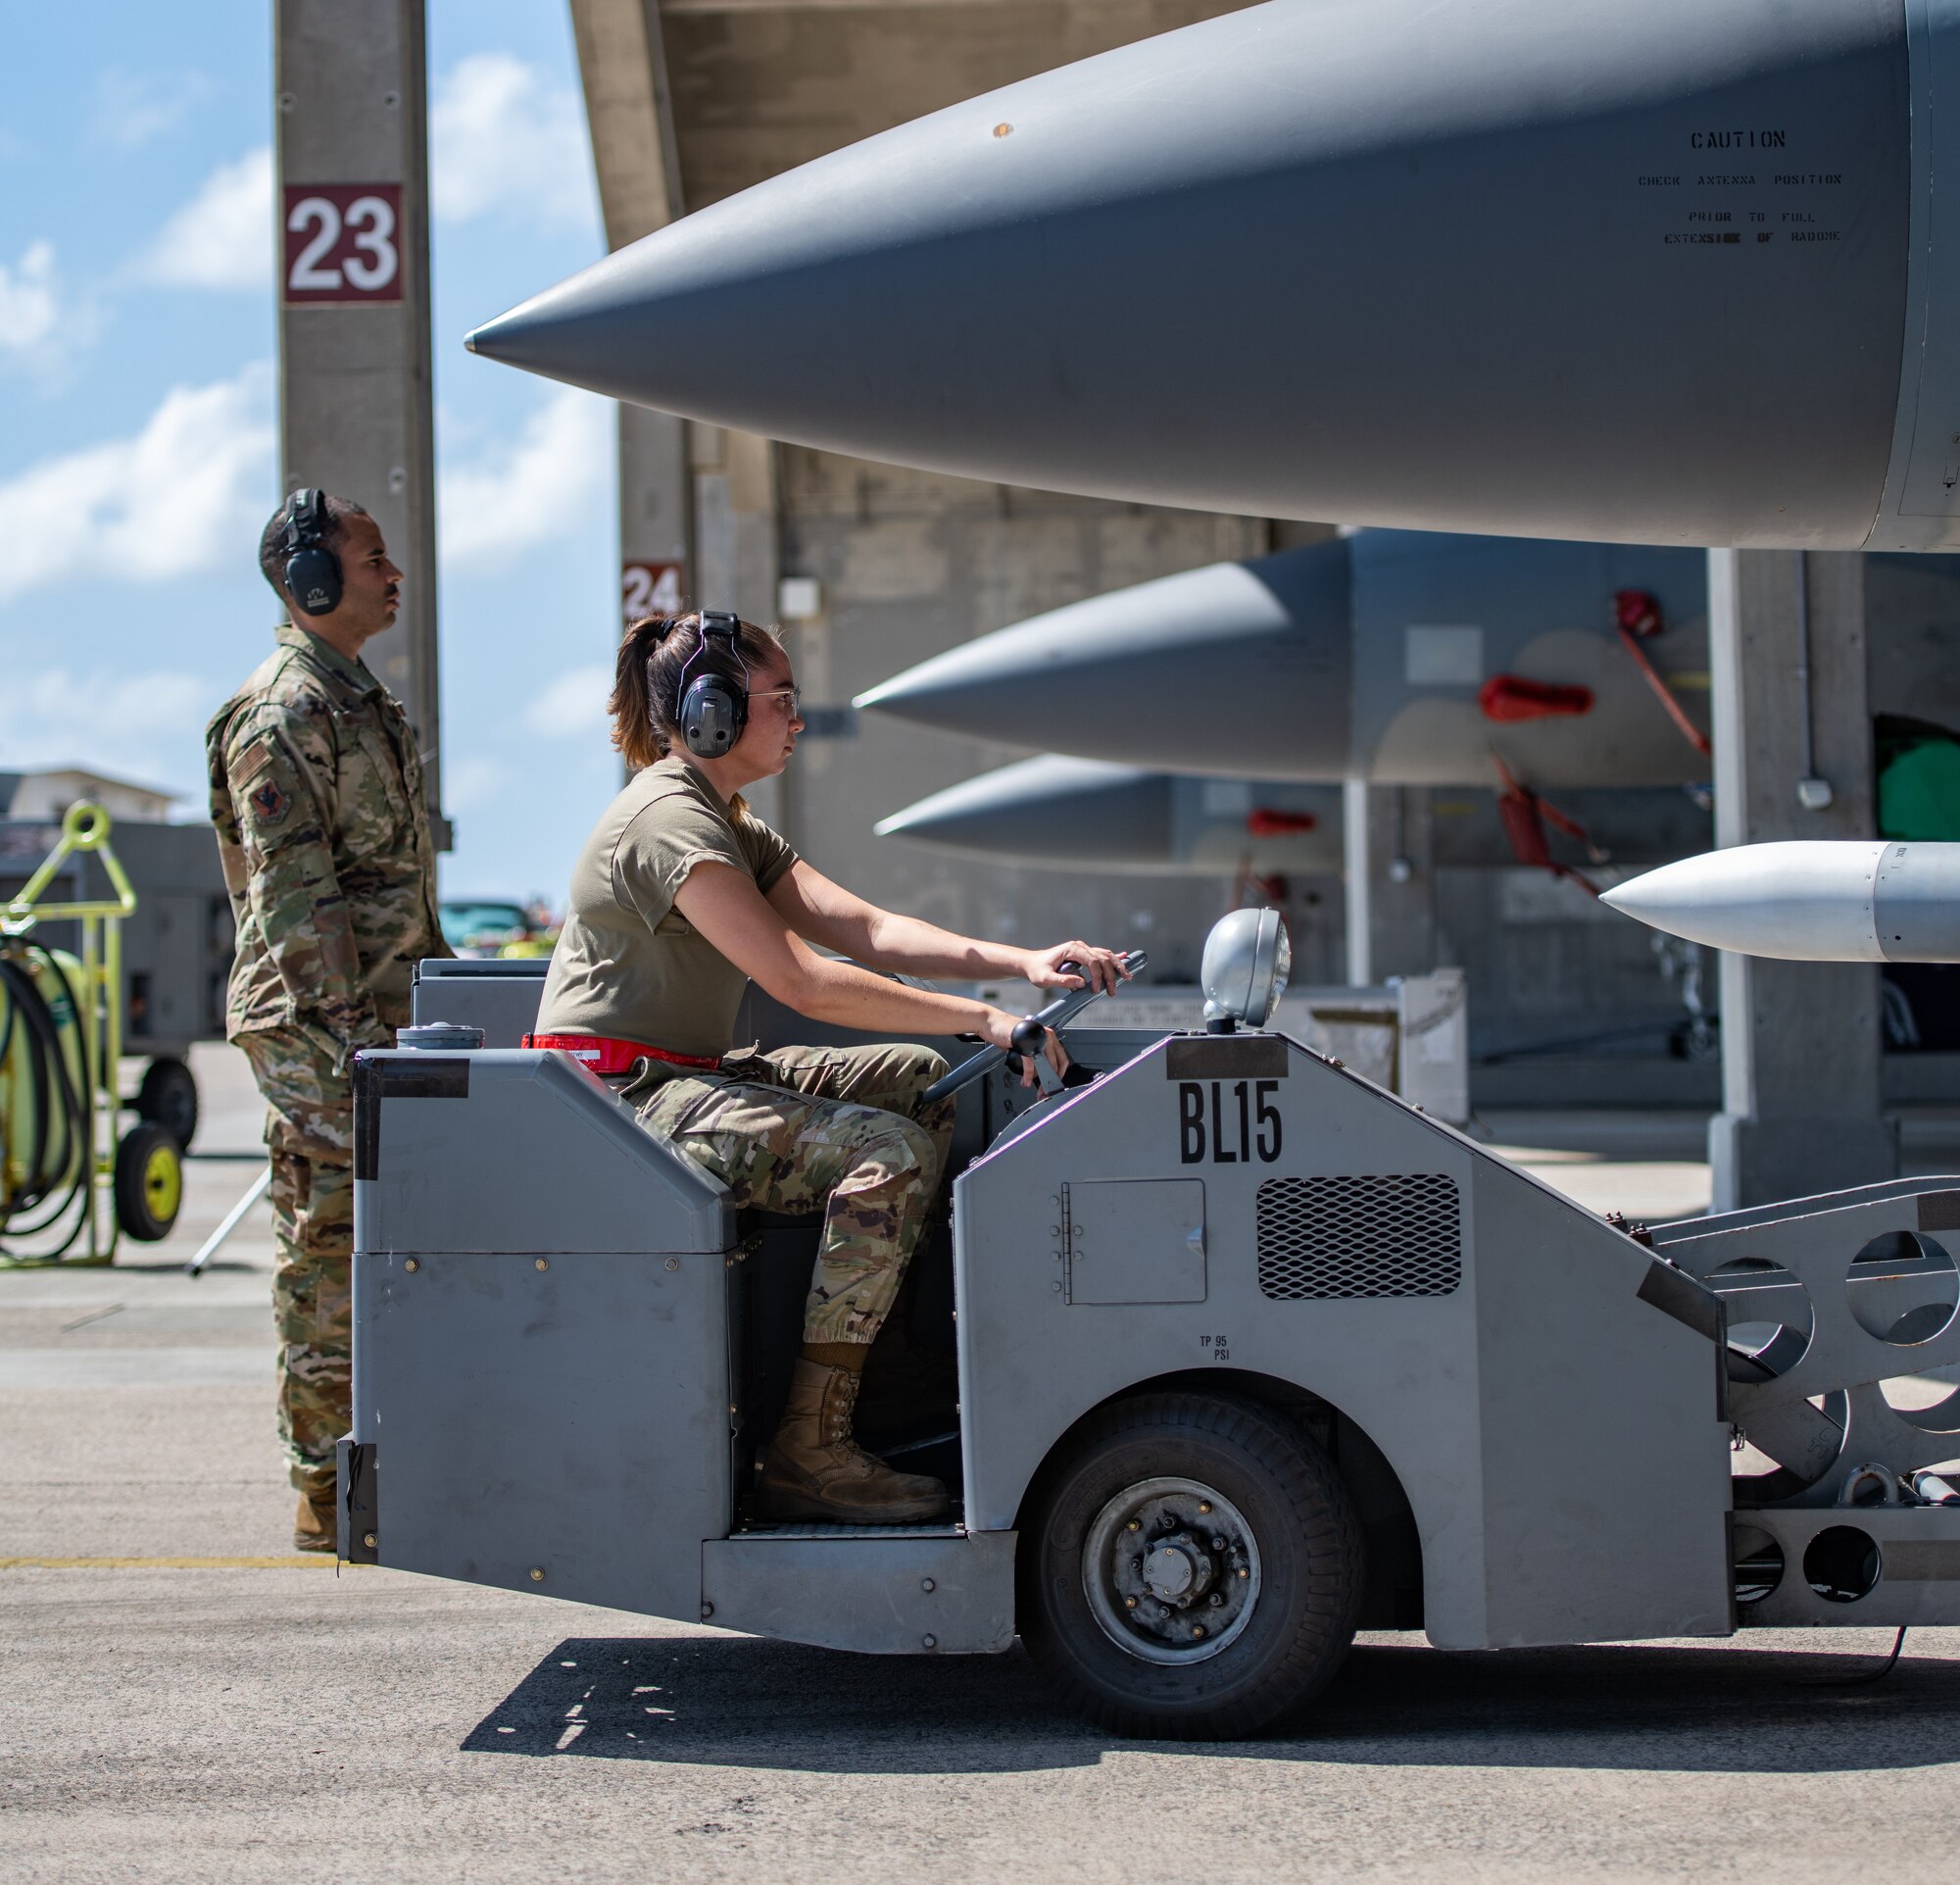 A female Airman steers a machine that carries a missile toward a fighter jet.